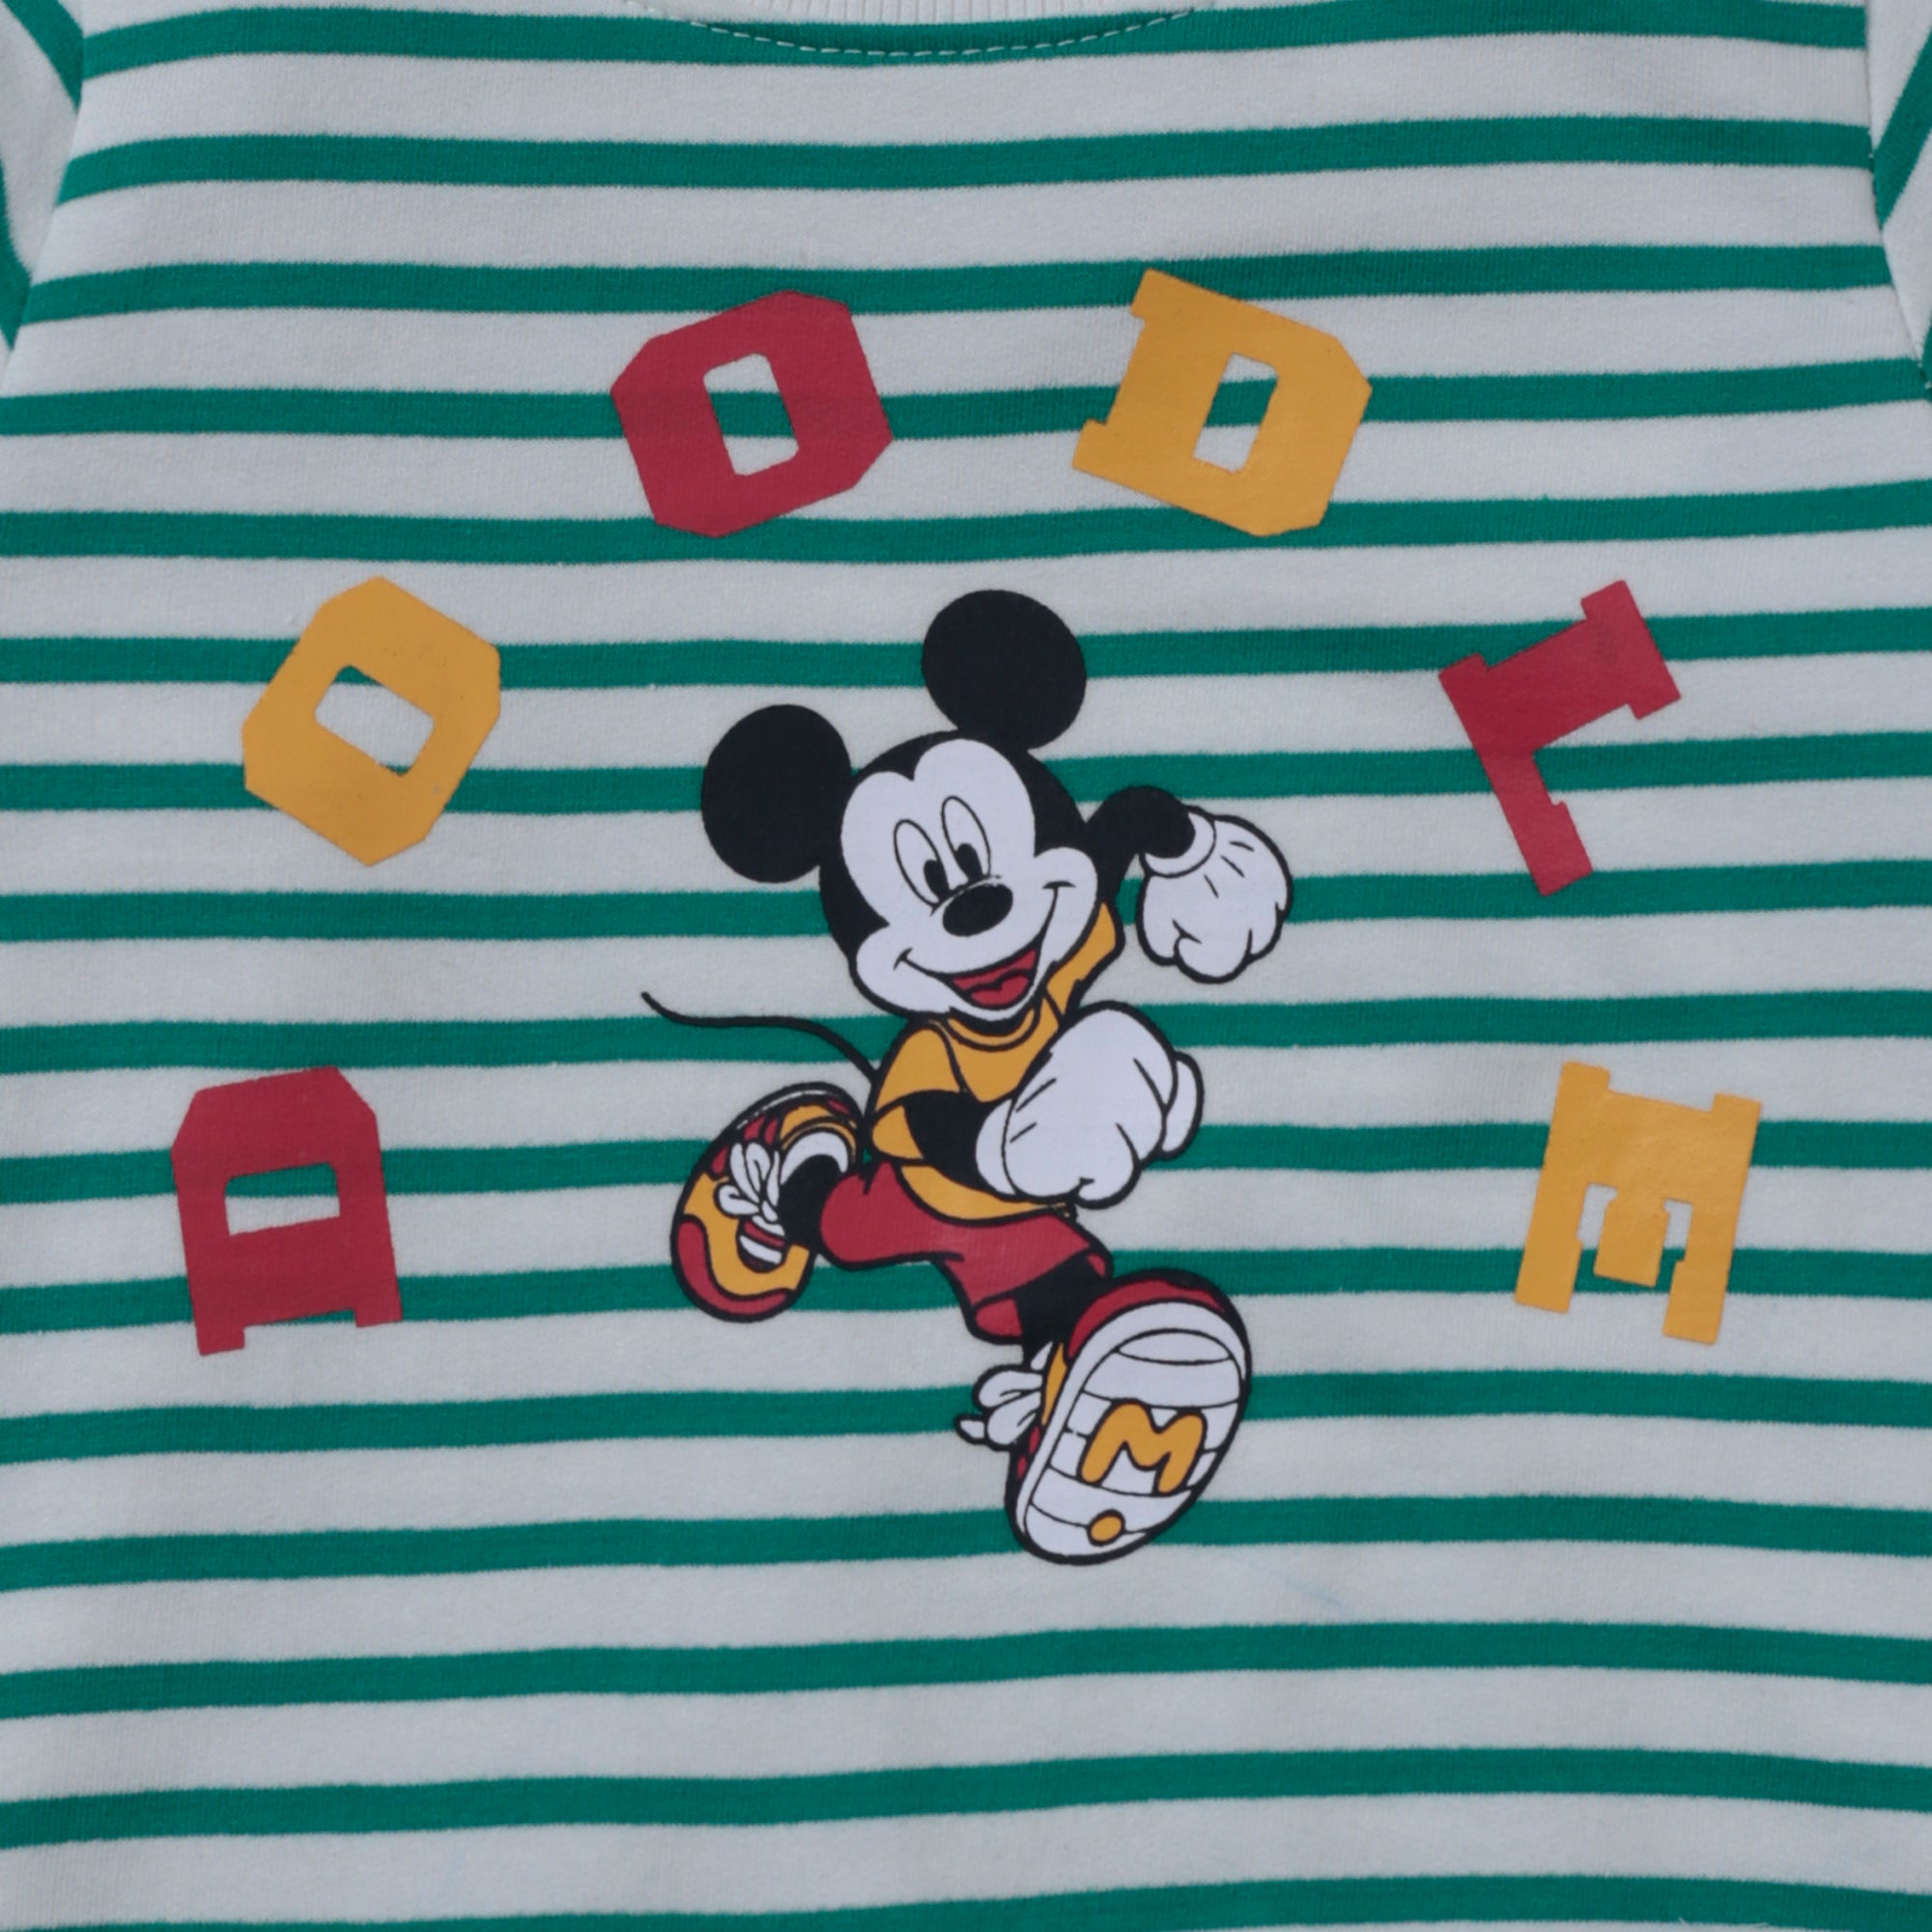 Green/White Mickey Mouse Graphic Sweatshirt